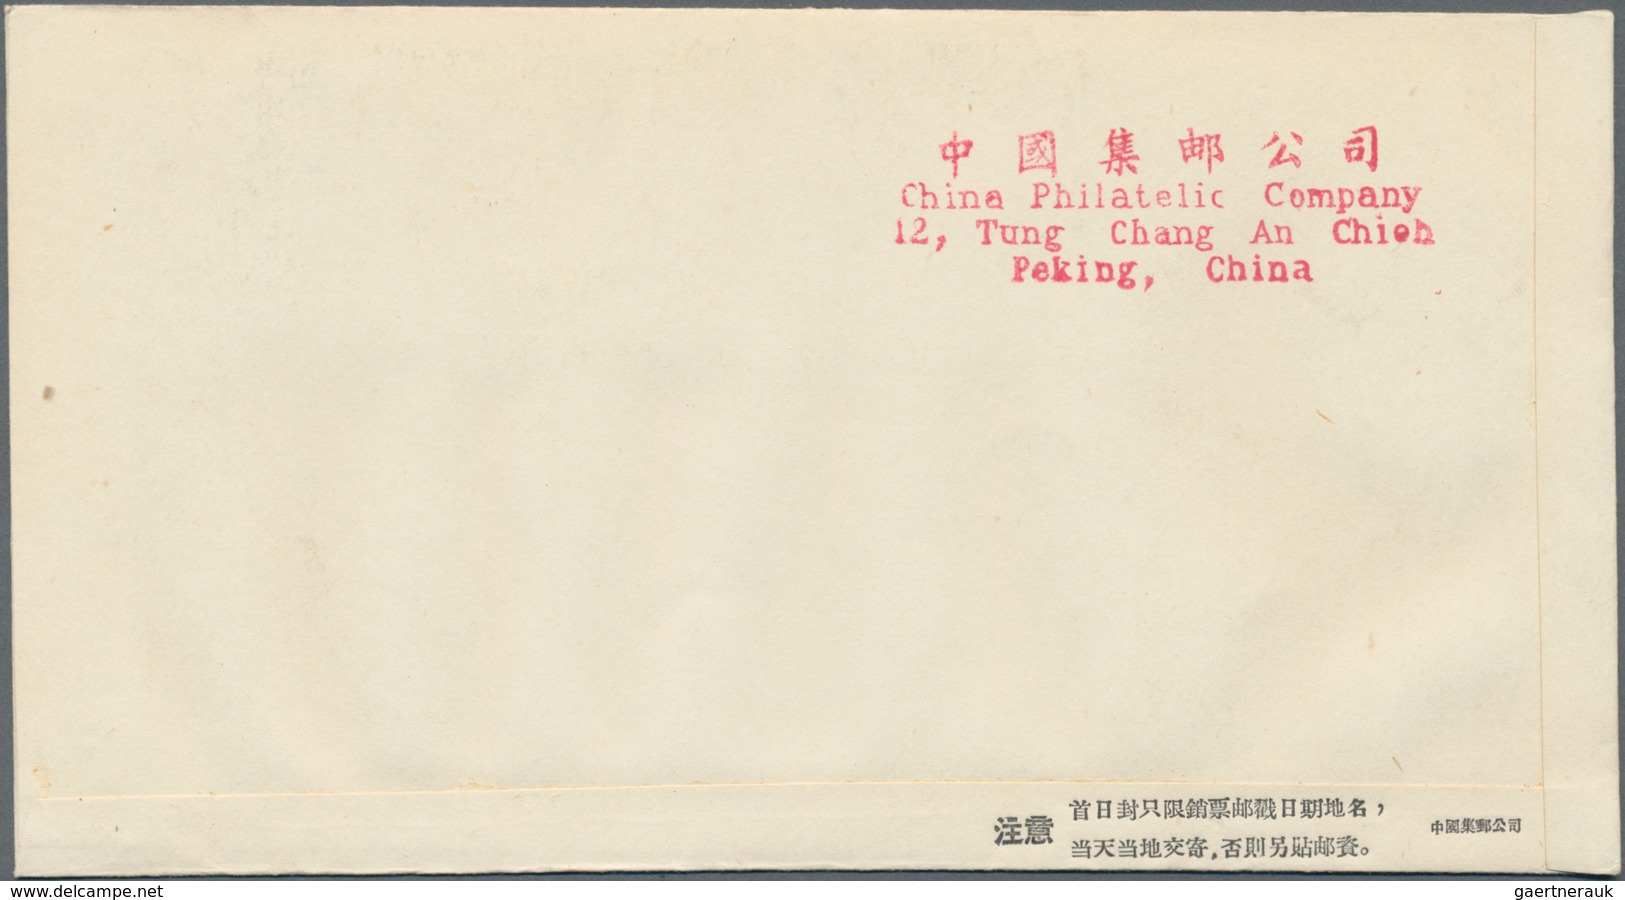 China - Volksrepublik: 1960, 5 First Day covers of C74, C75, C76, S37, and S42", bearing the full se